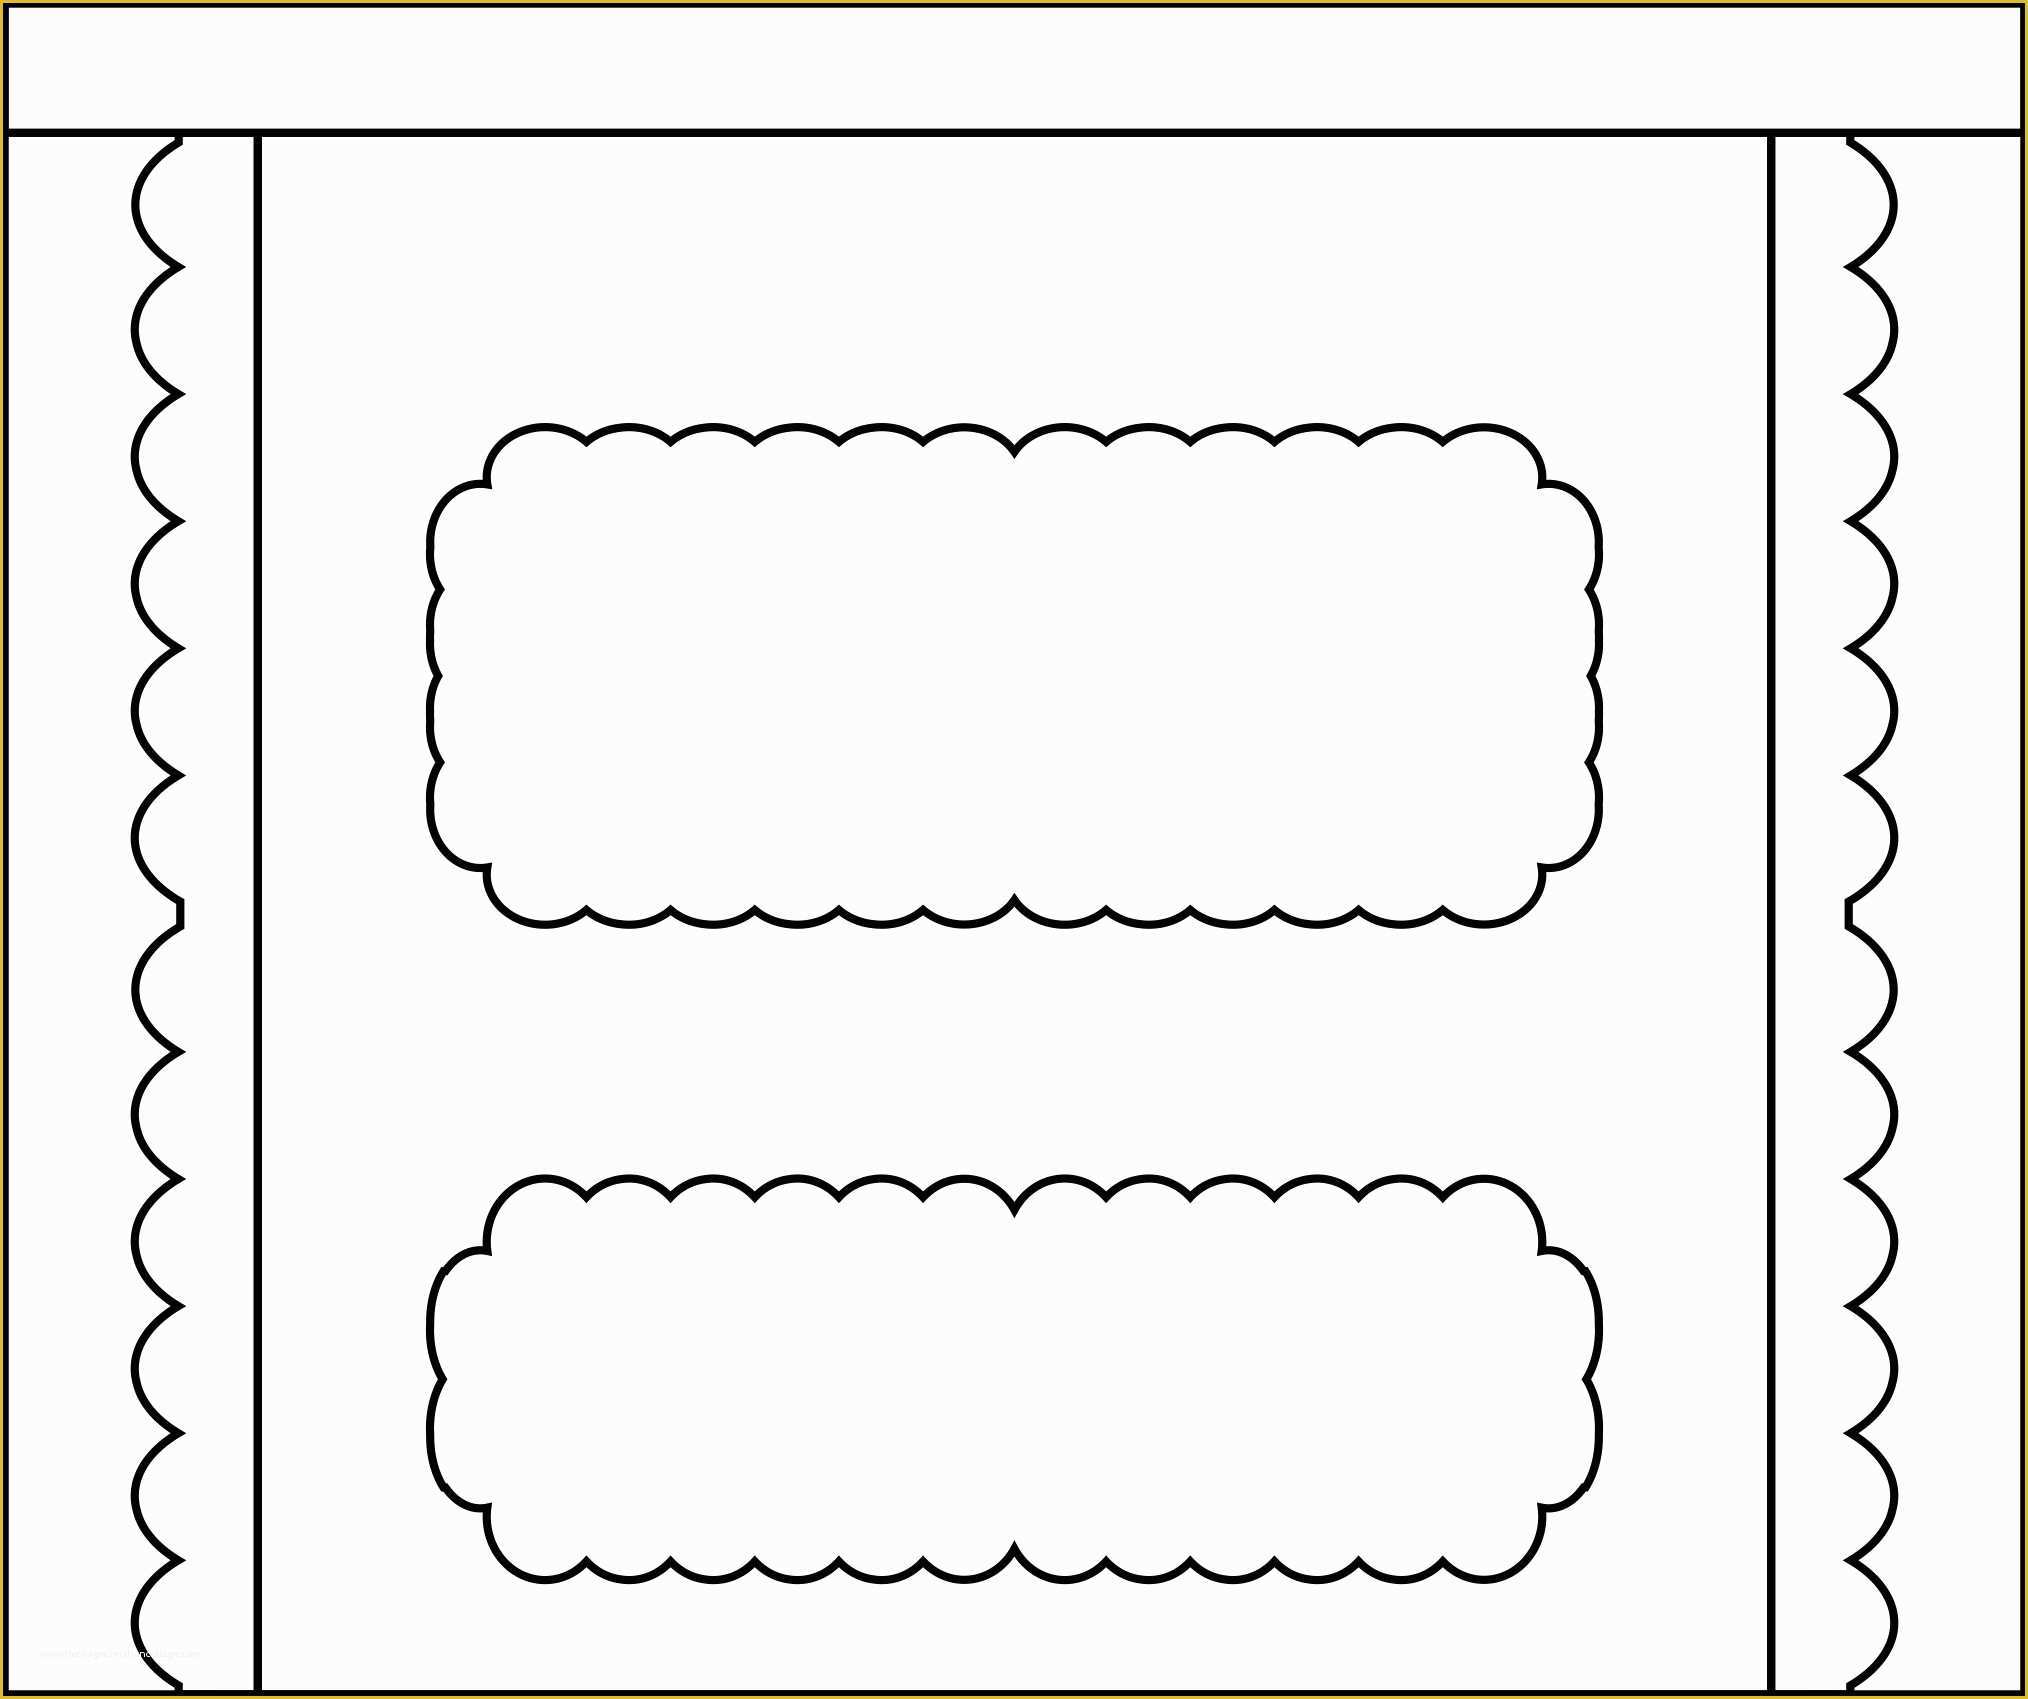 Free Hershey Bar Wrapper Template Of Free Candy Bar Templates Printable